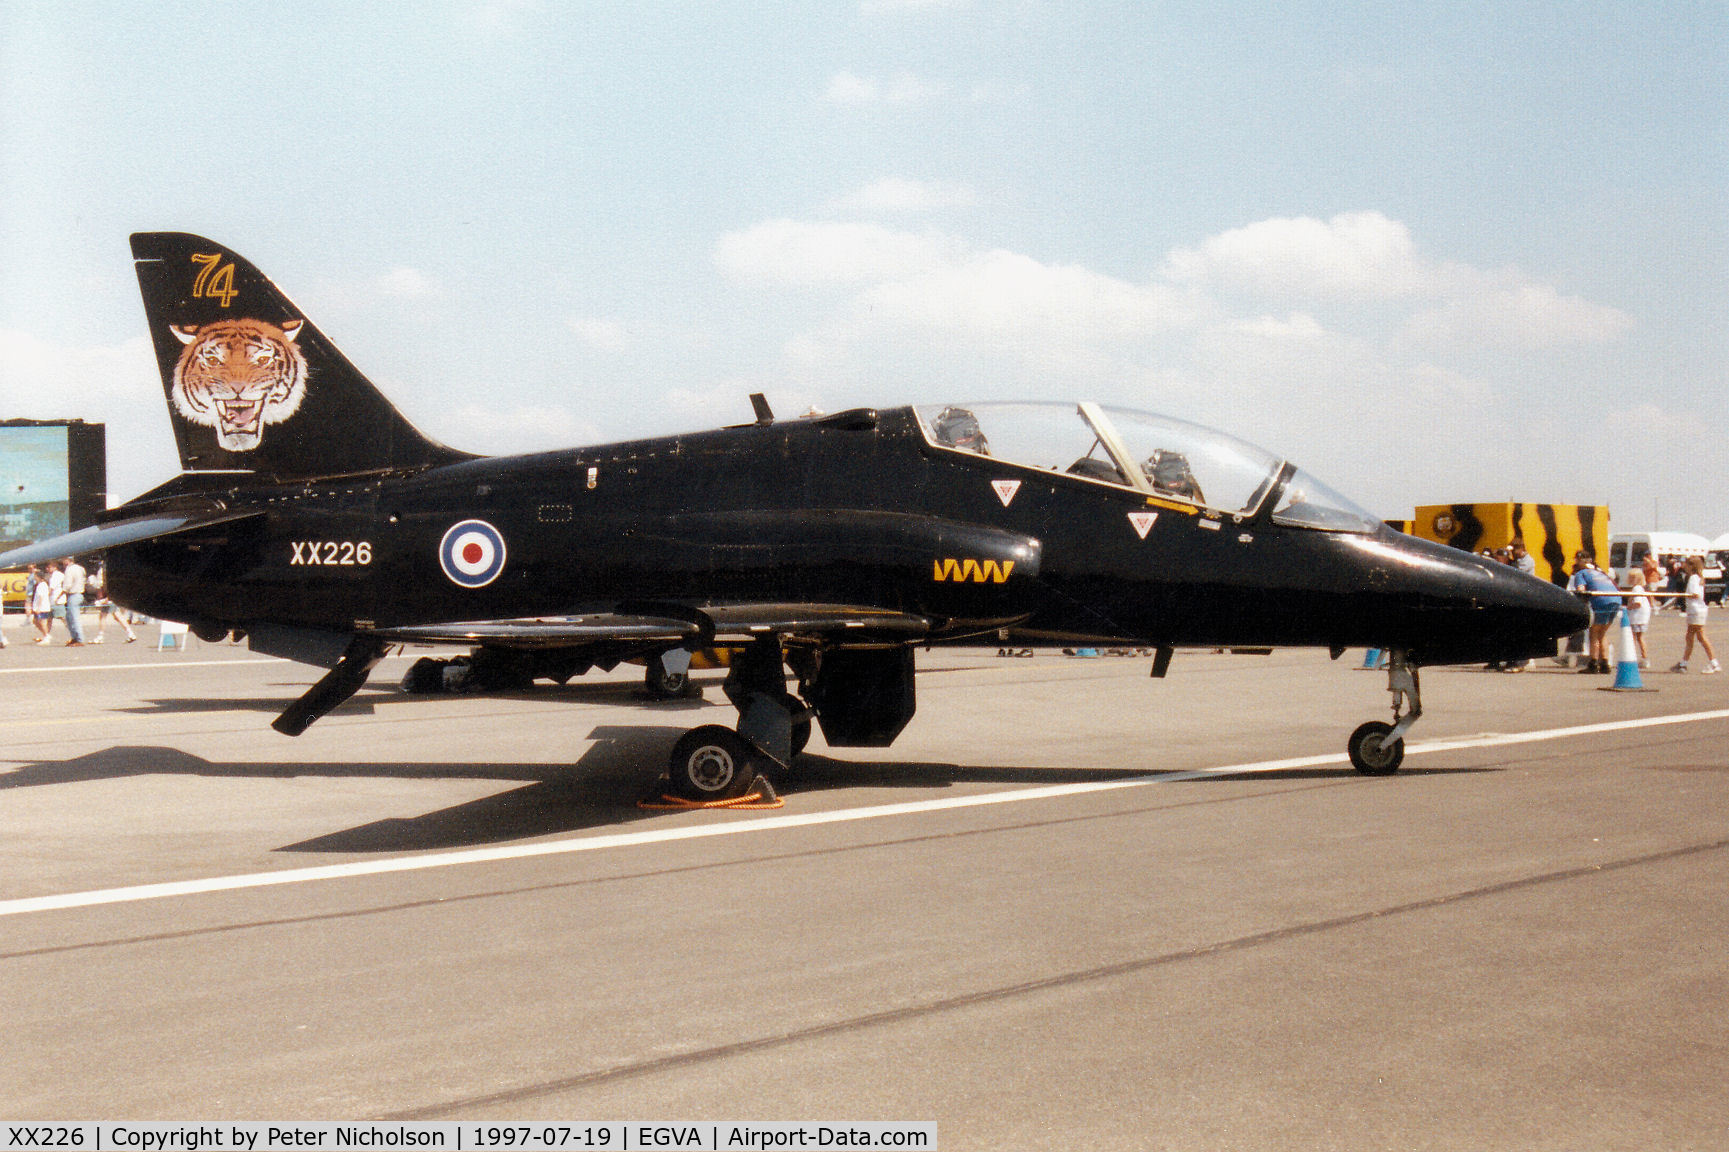 XX226, 1978 Hawker Siddeley Hawk T.1 C/N 062/312062, Another view of the 74[Reserve] Squadron Hawk T.1, callsign Tiger 2, from RAF Valley on display at the 1997 Intnl Air Tattoo at RAF Fairford.